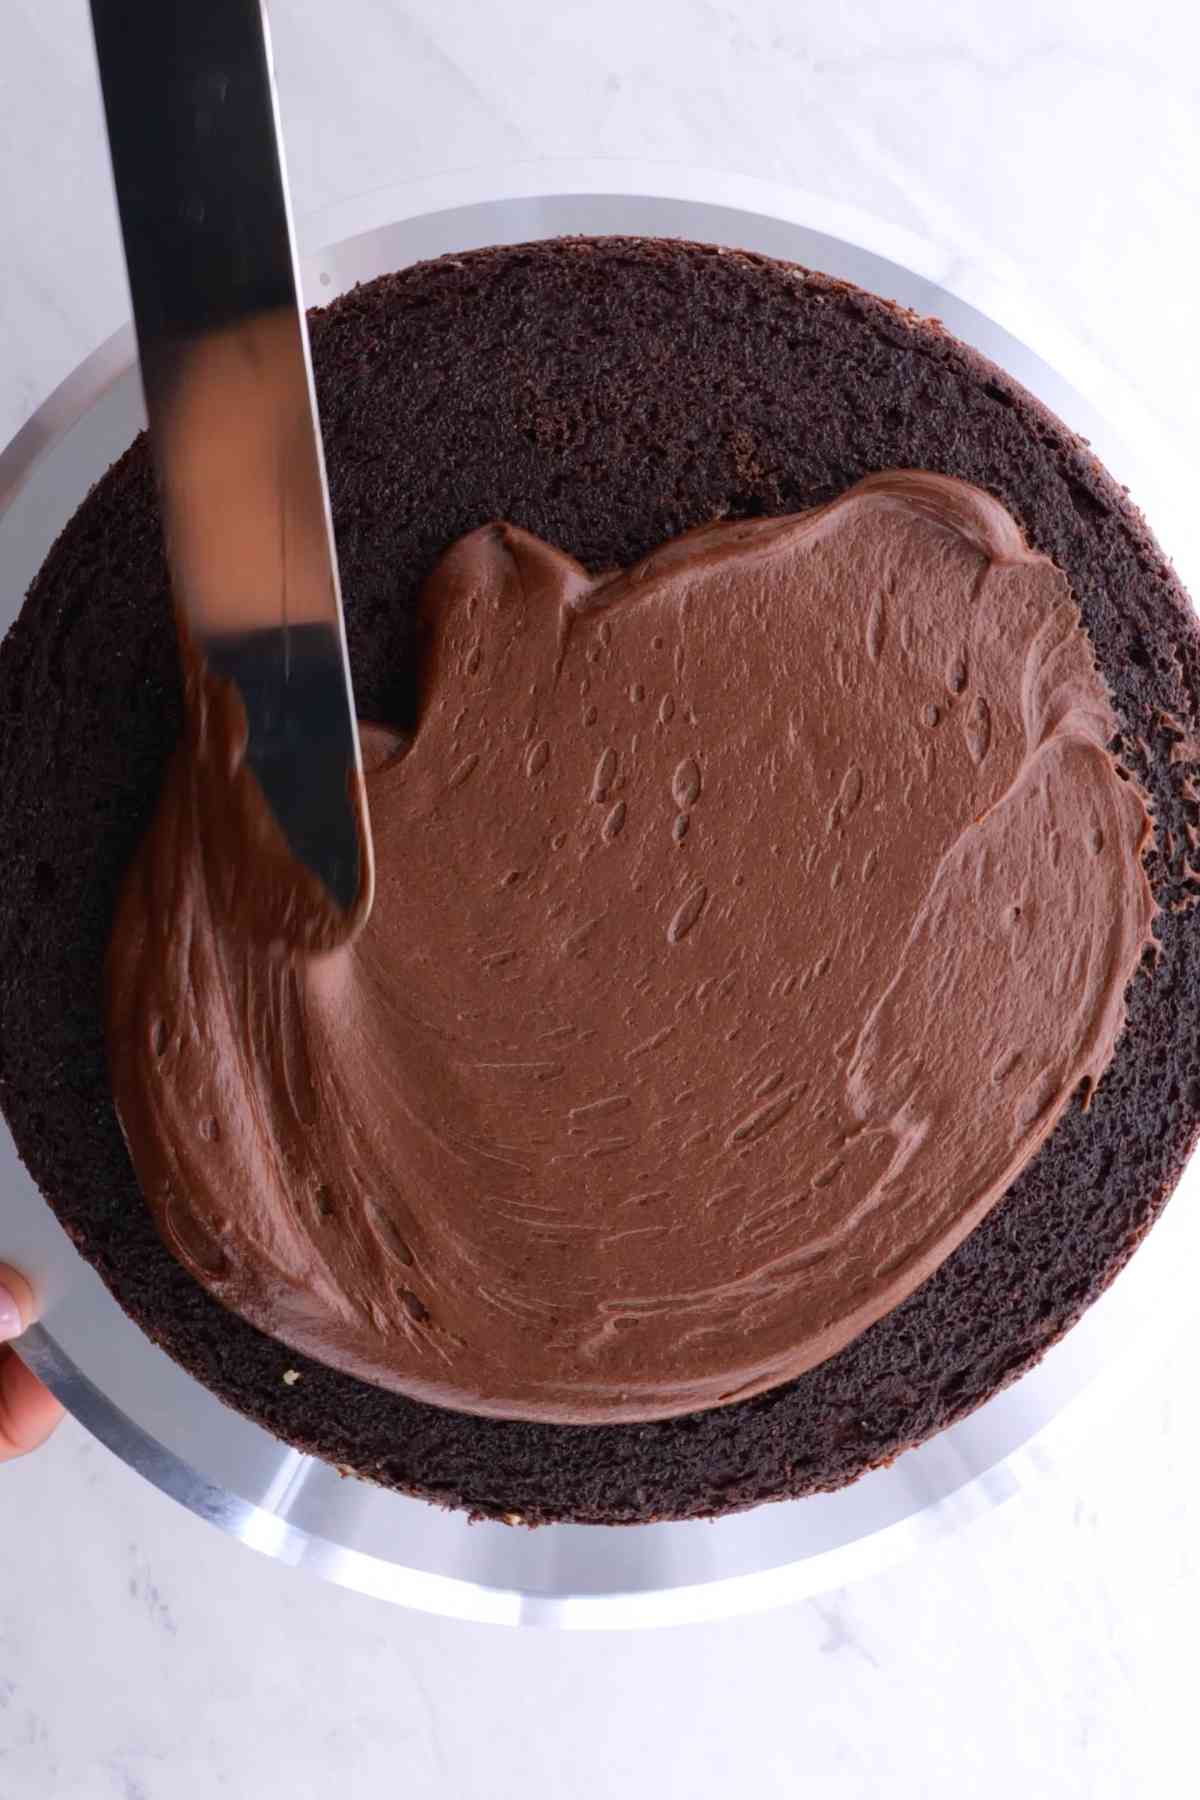 Chocolate Frosting being spread on chocolate cake